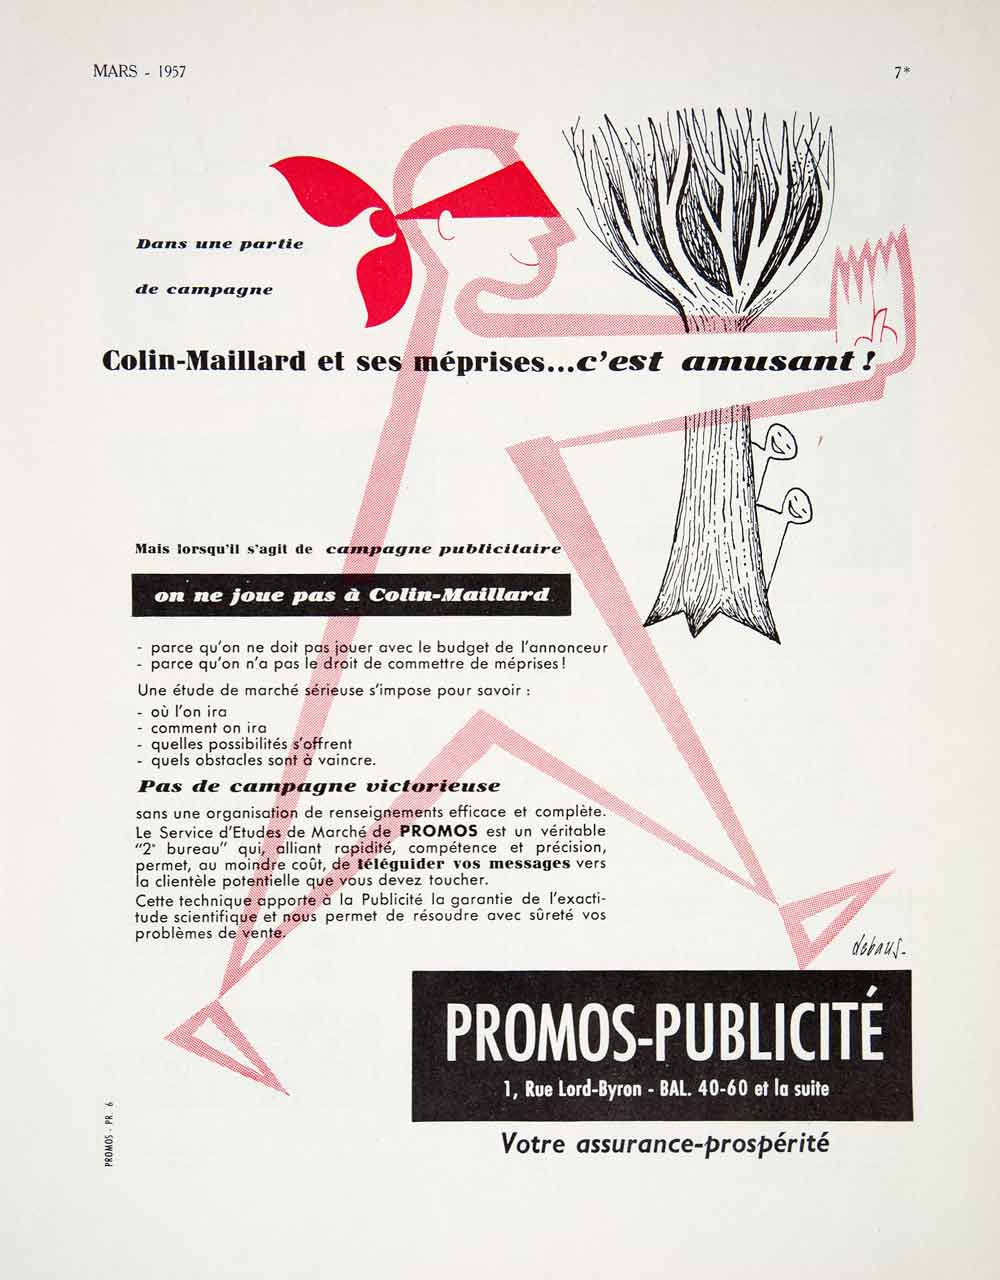 1957 Ad Colin-Maillard Promos-Publicite 1 Rue Lord-Byron Advertising Agency VEN7